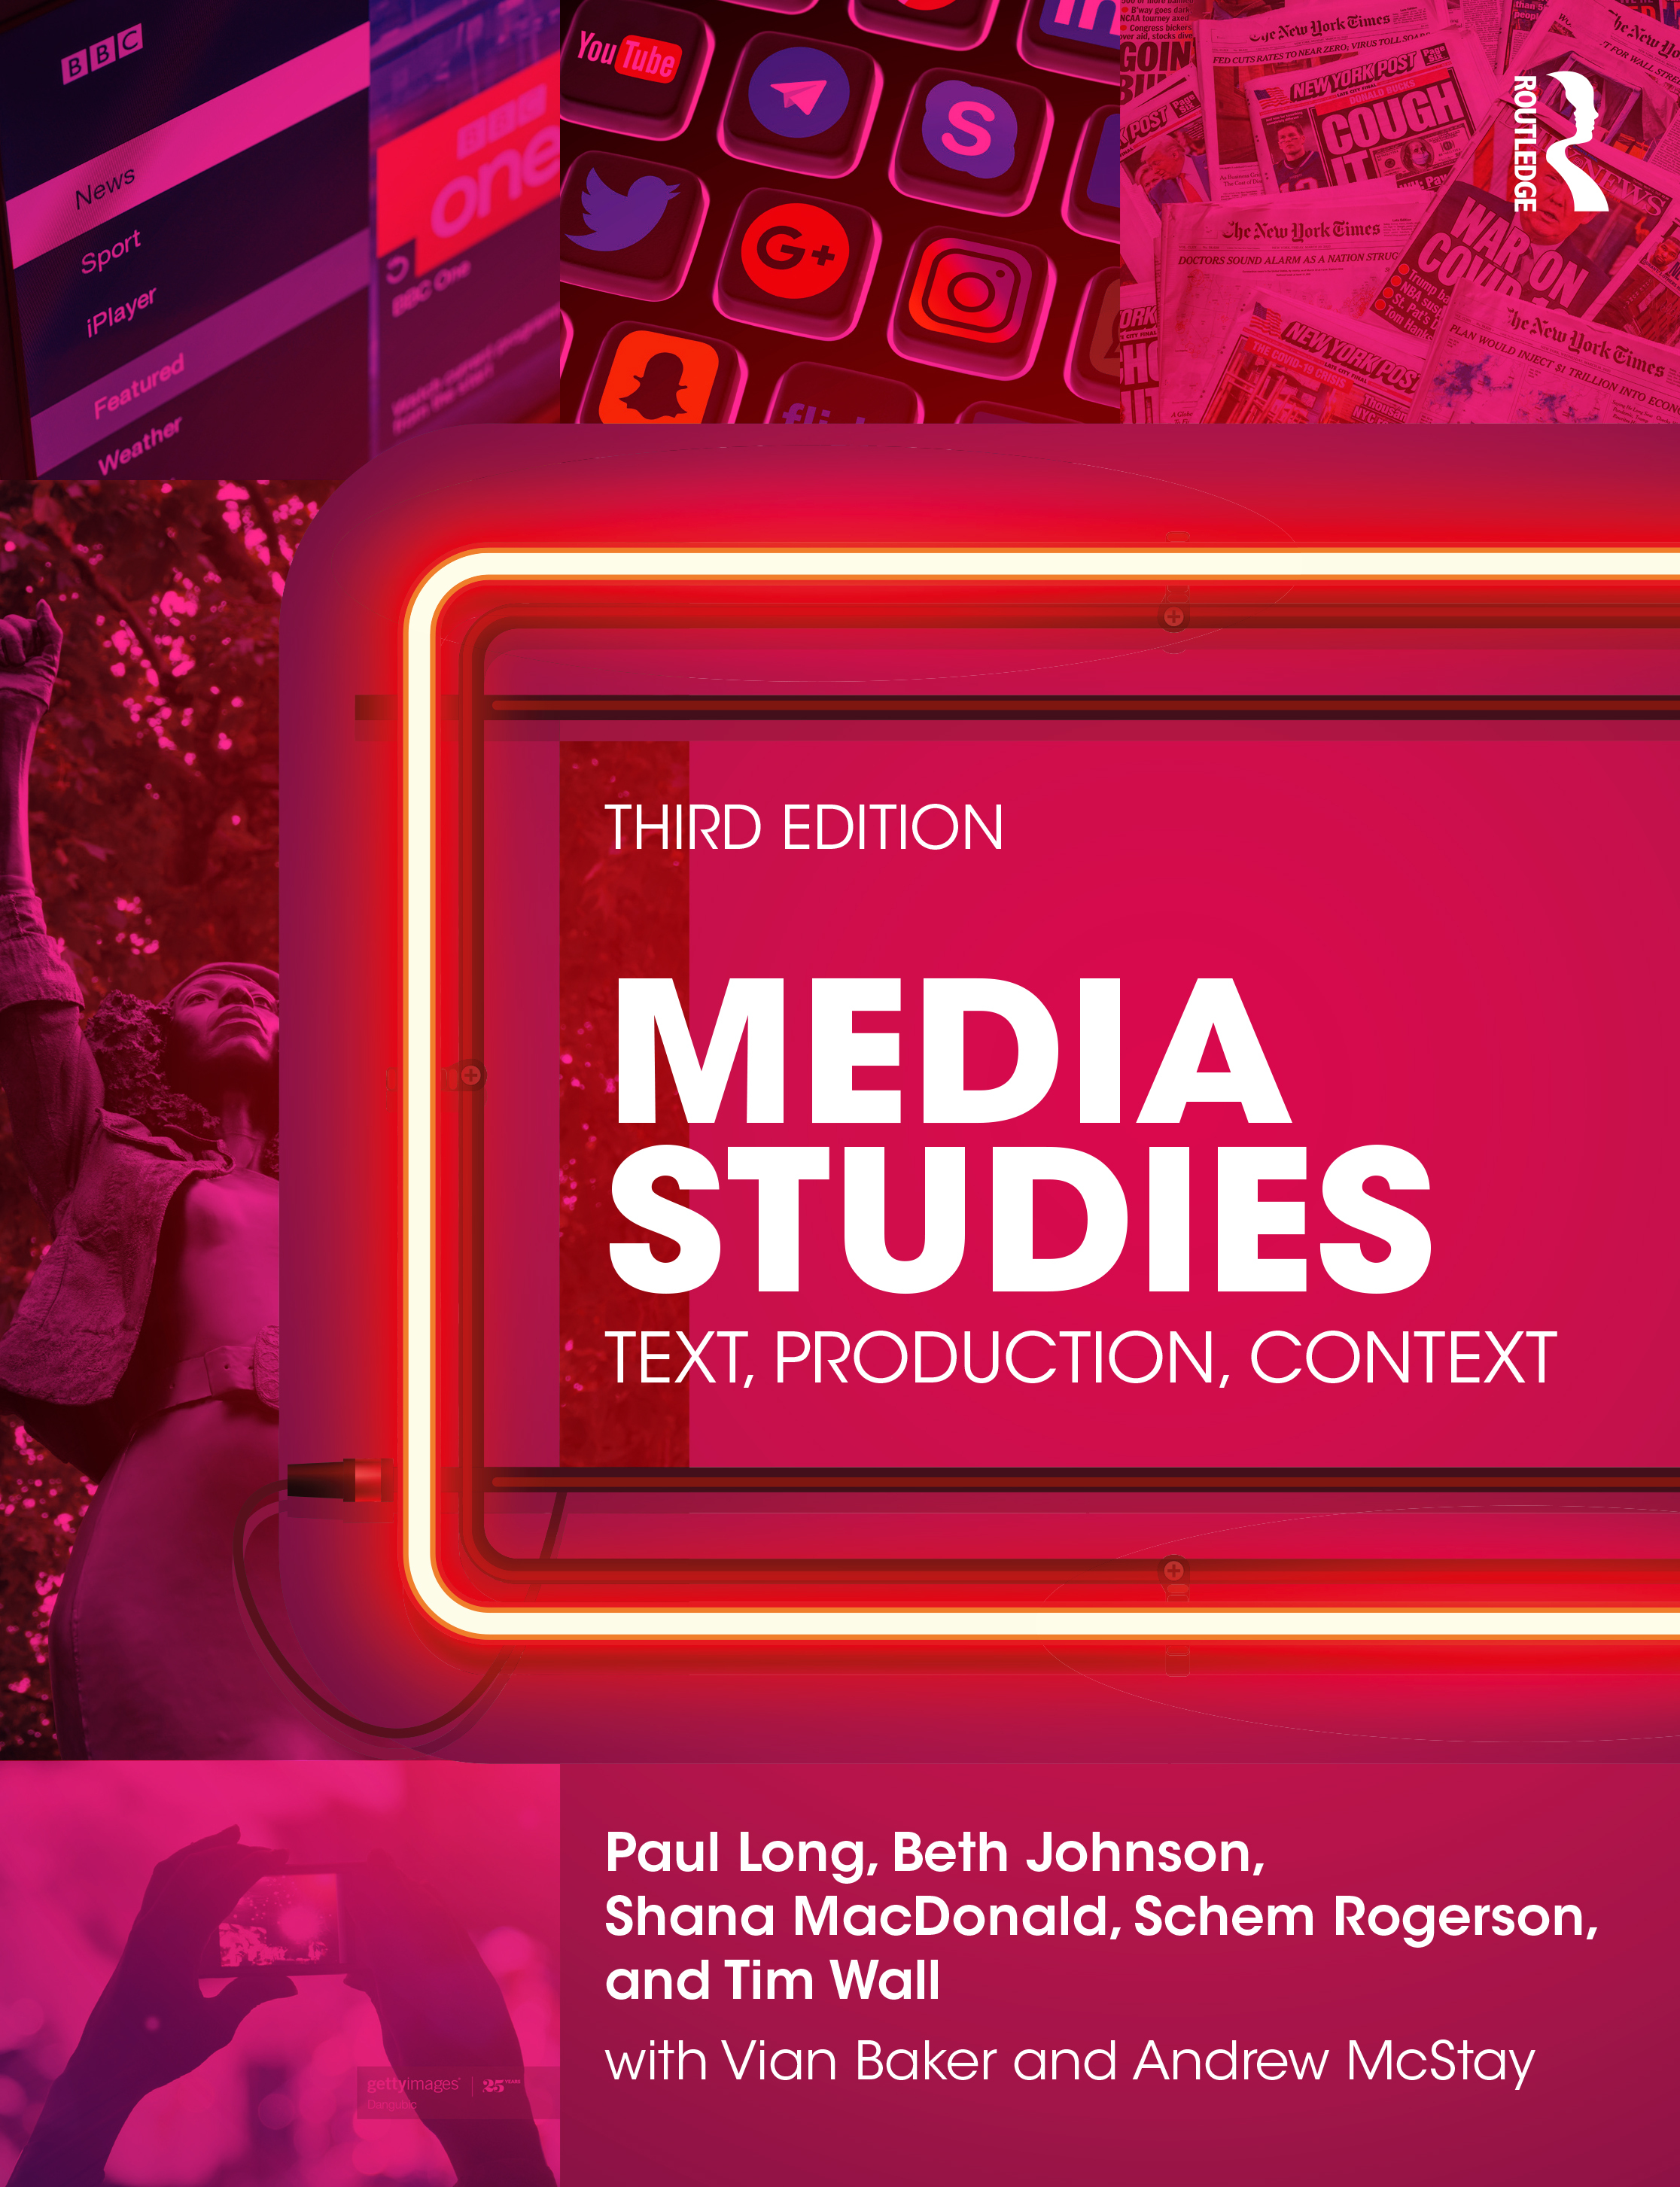 Dr Beth Johnson launches new co-authored book: Media Studies: Texts, Production, Context